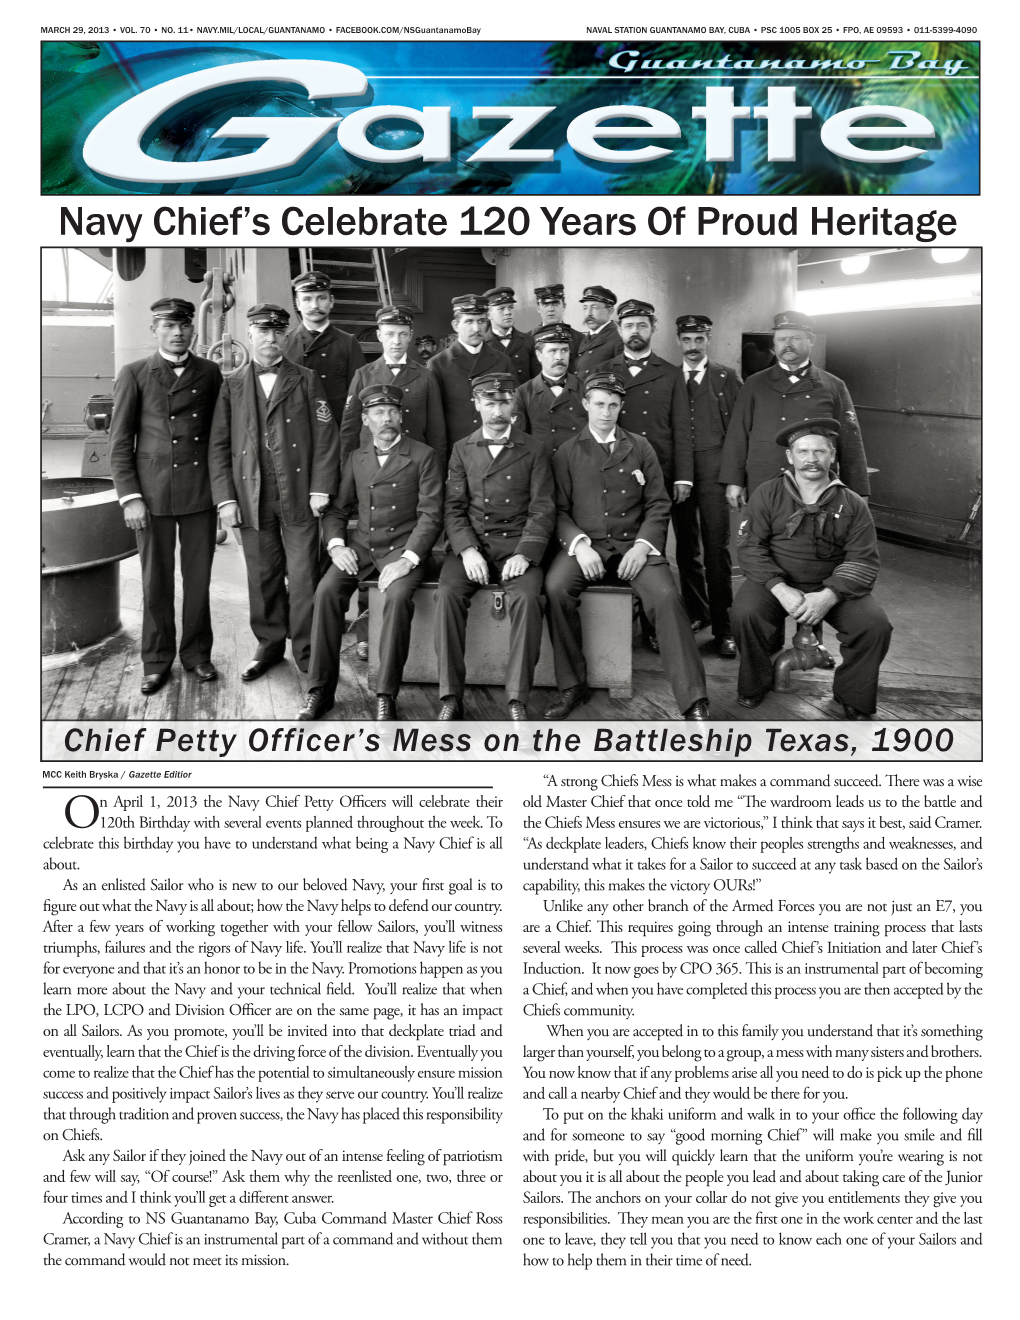 Navy Chief's Celebrate 120 Years of Proud Heritage